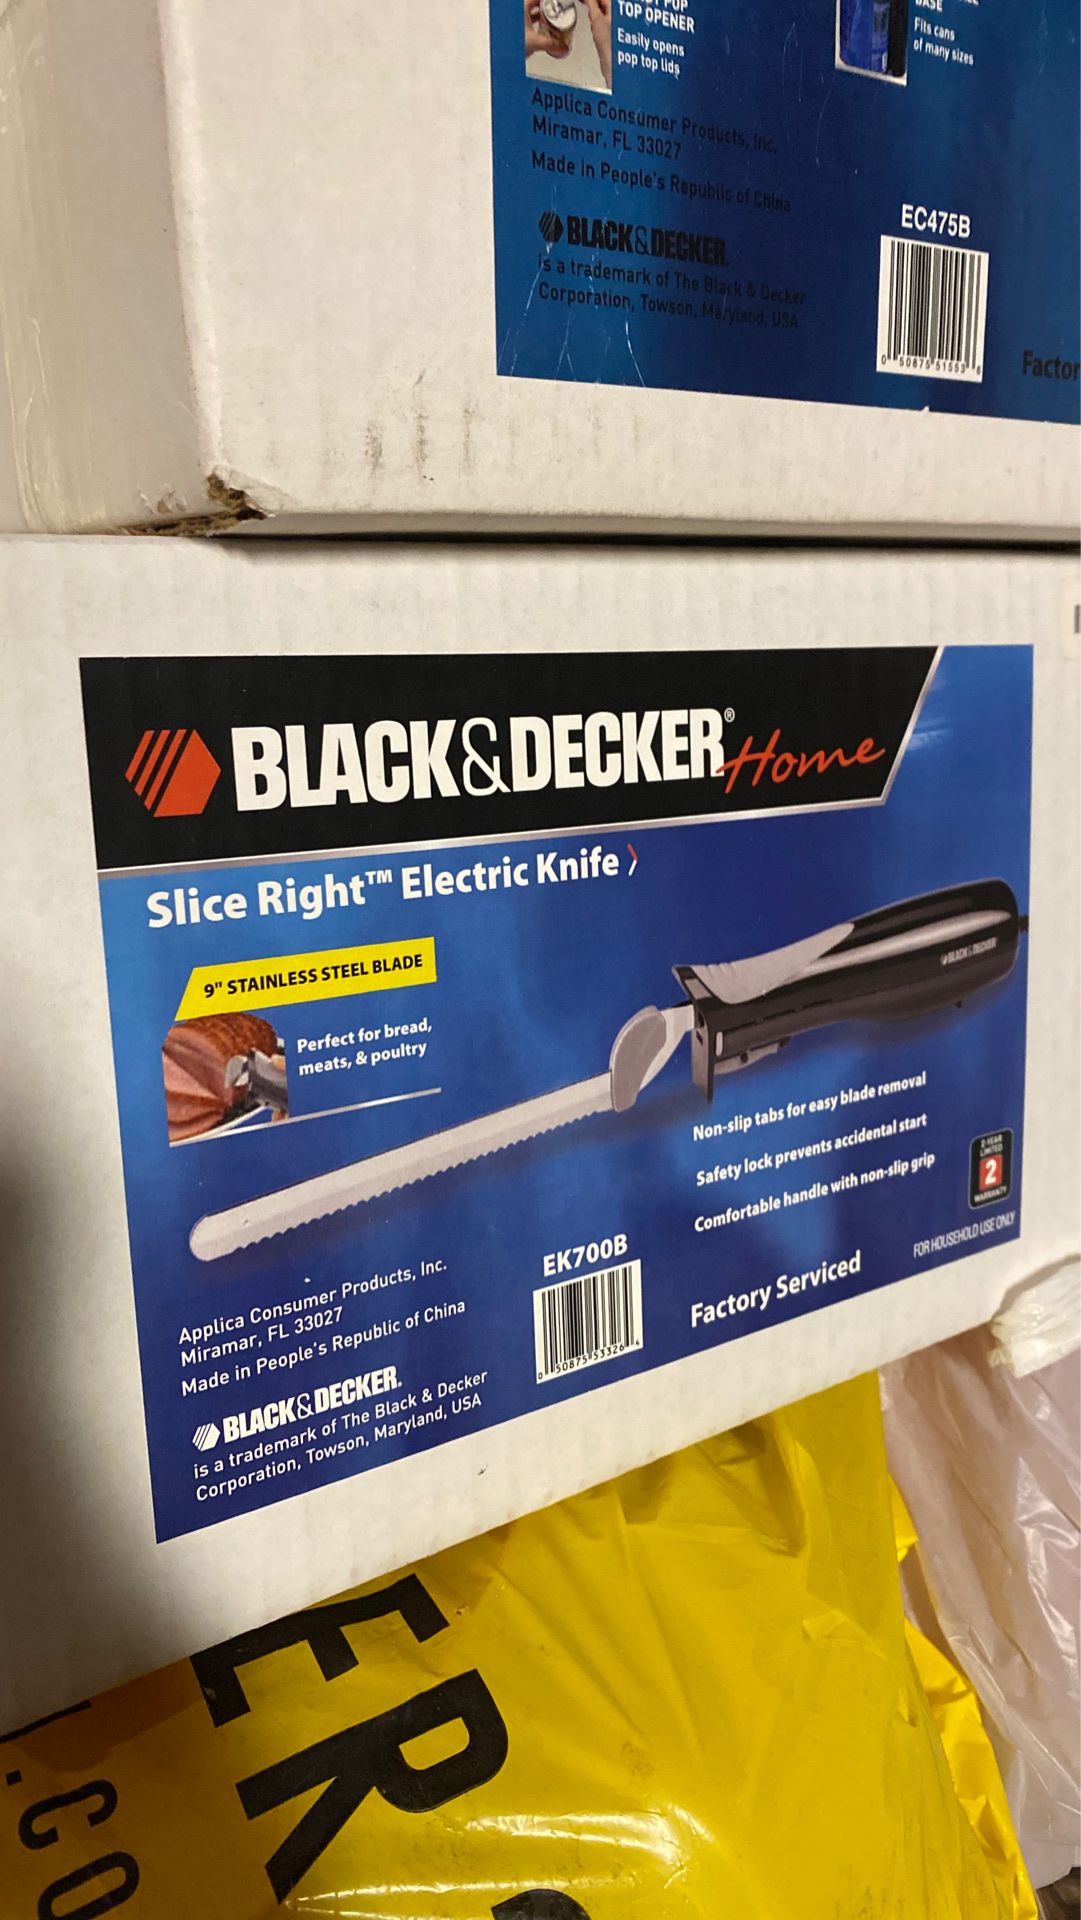 Slice right electric knife